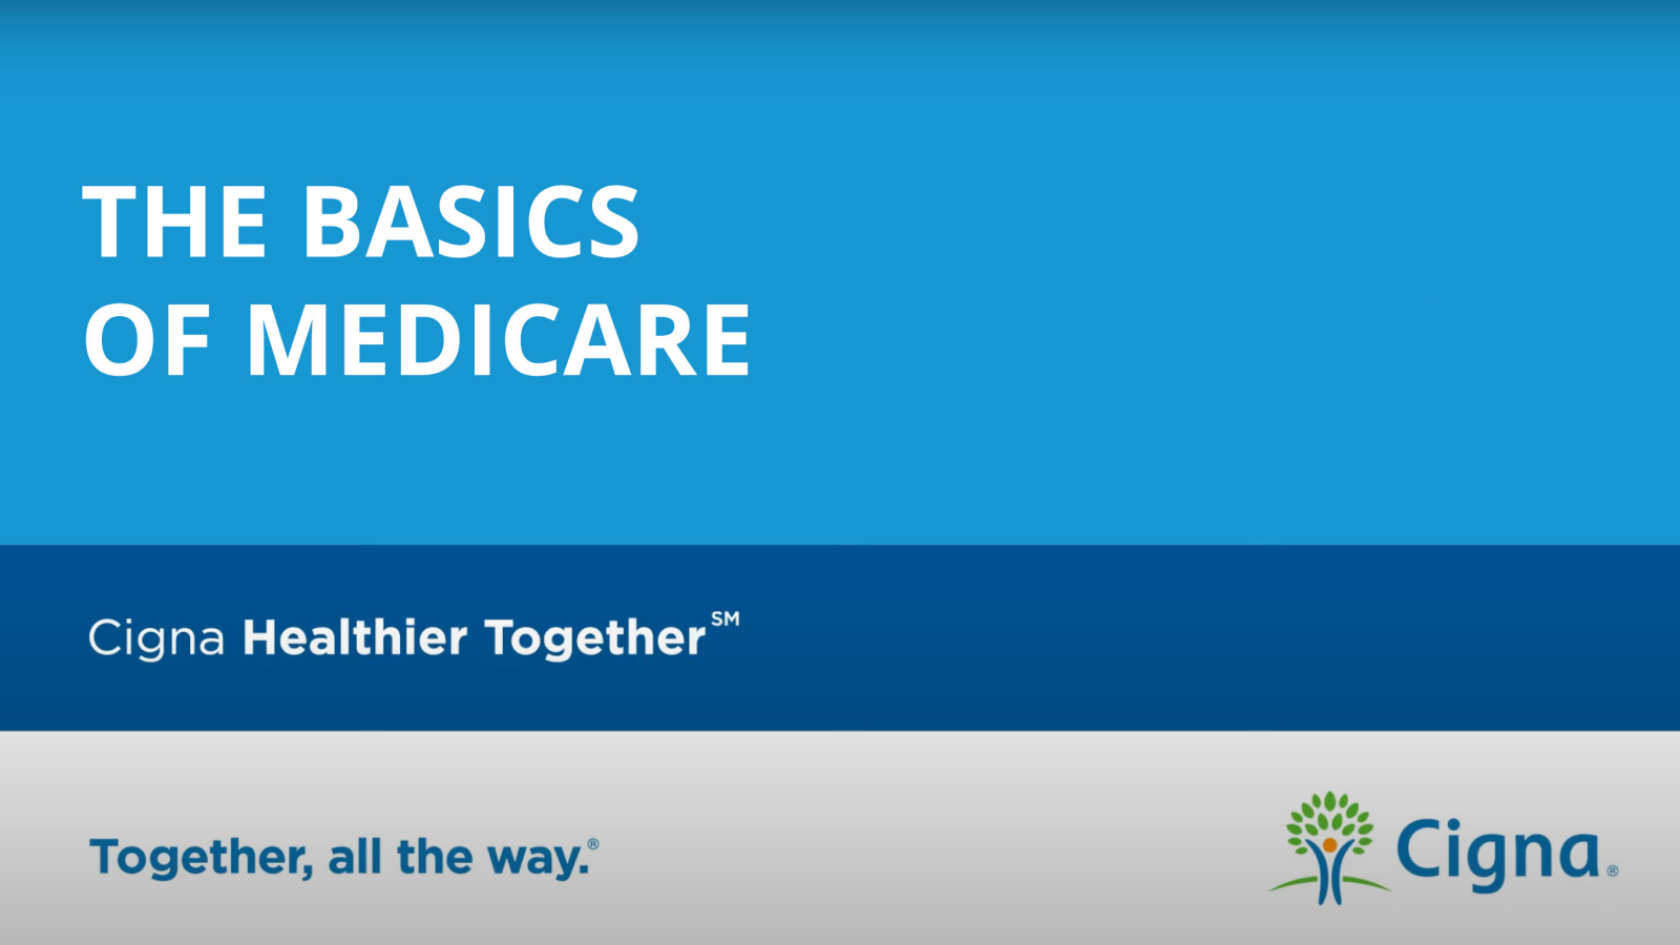 Video: The Basics of Medicare